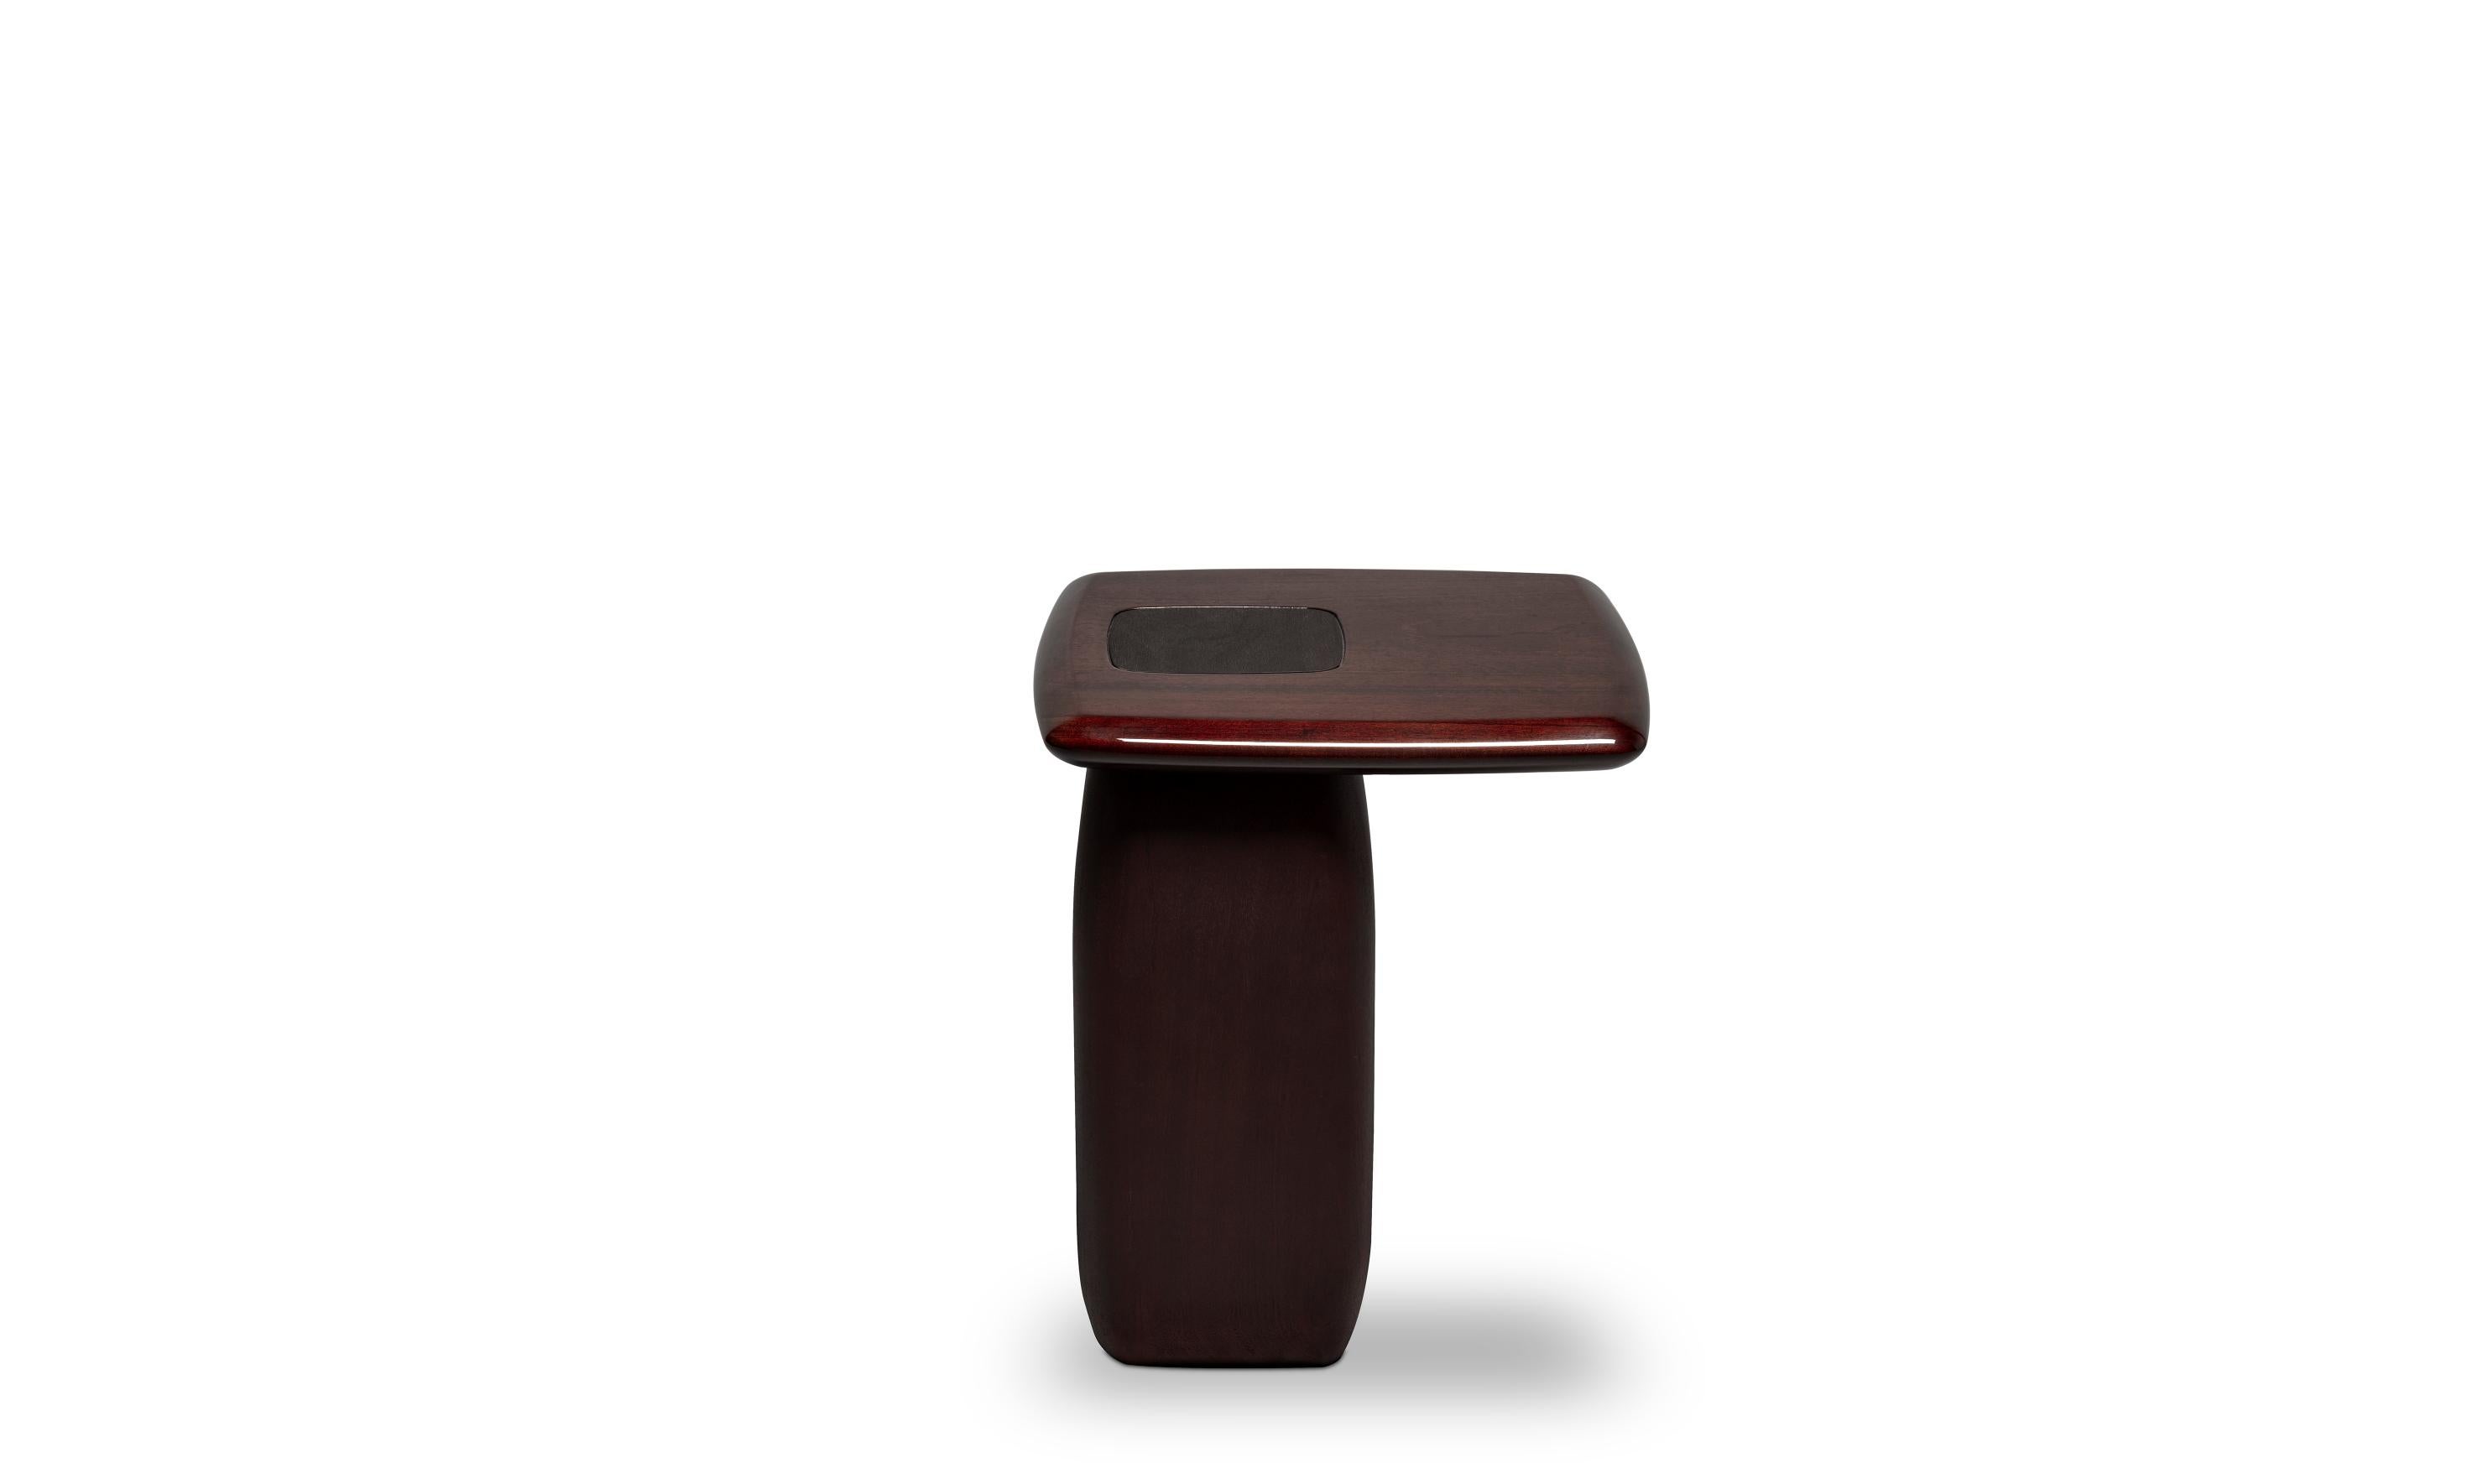 Bossa Side Table in Mahogany Solid Wood, Handcrafted by Duistt

The “bossa” collection is inspired by the subtlety, particular charm and harmonious simplicity of the brazilian music movement that emerged in the late 50’s, “bossa nova”. With delicate